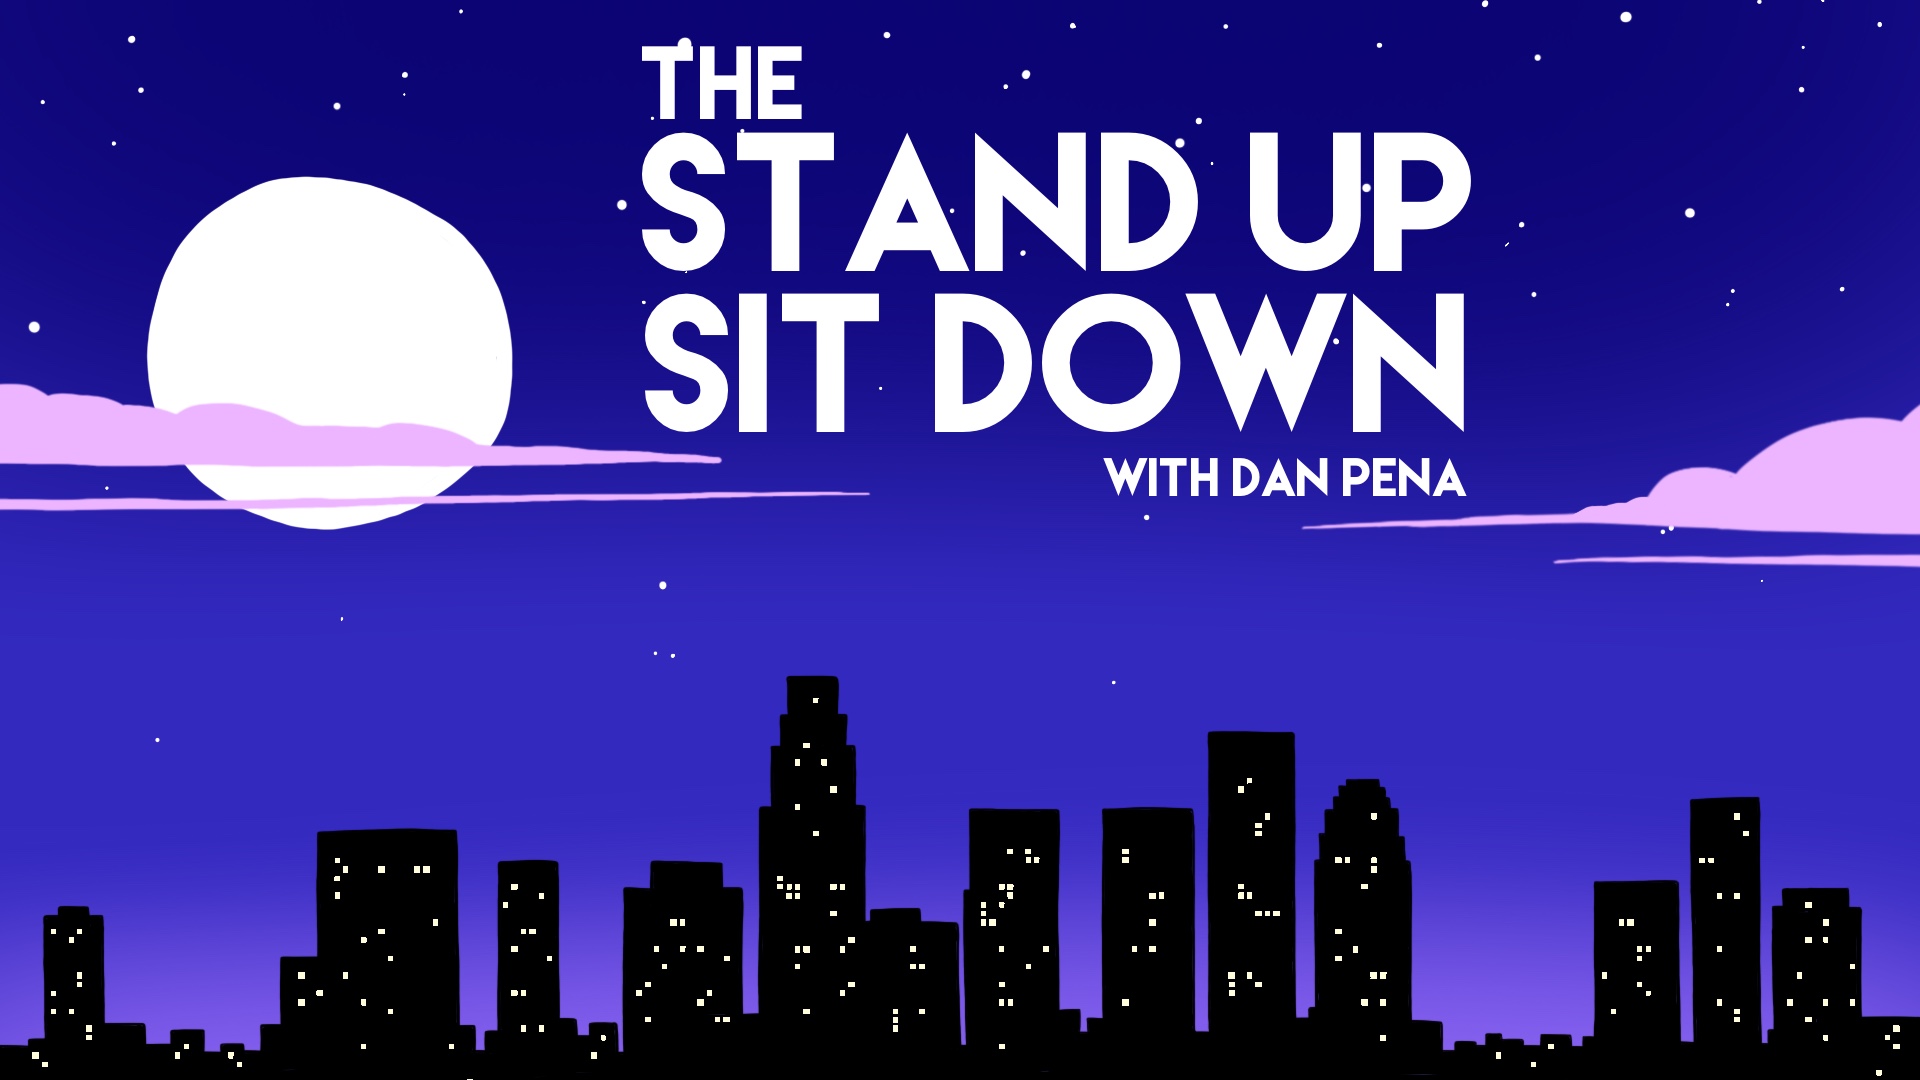 The Stand Up Sit Down with Dan Pena